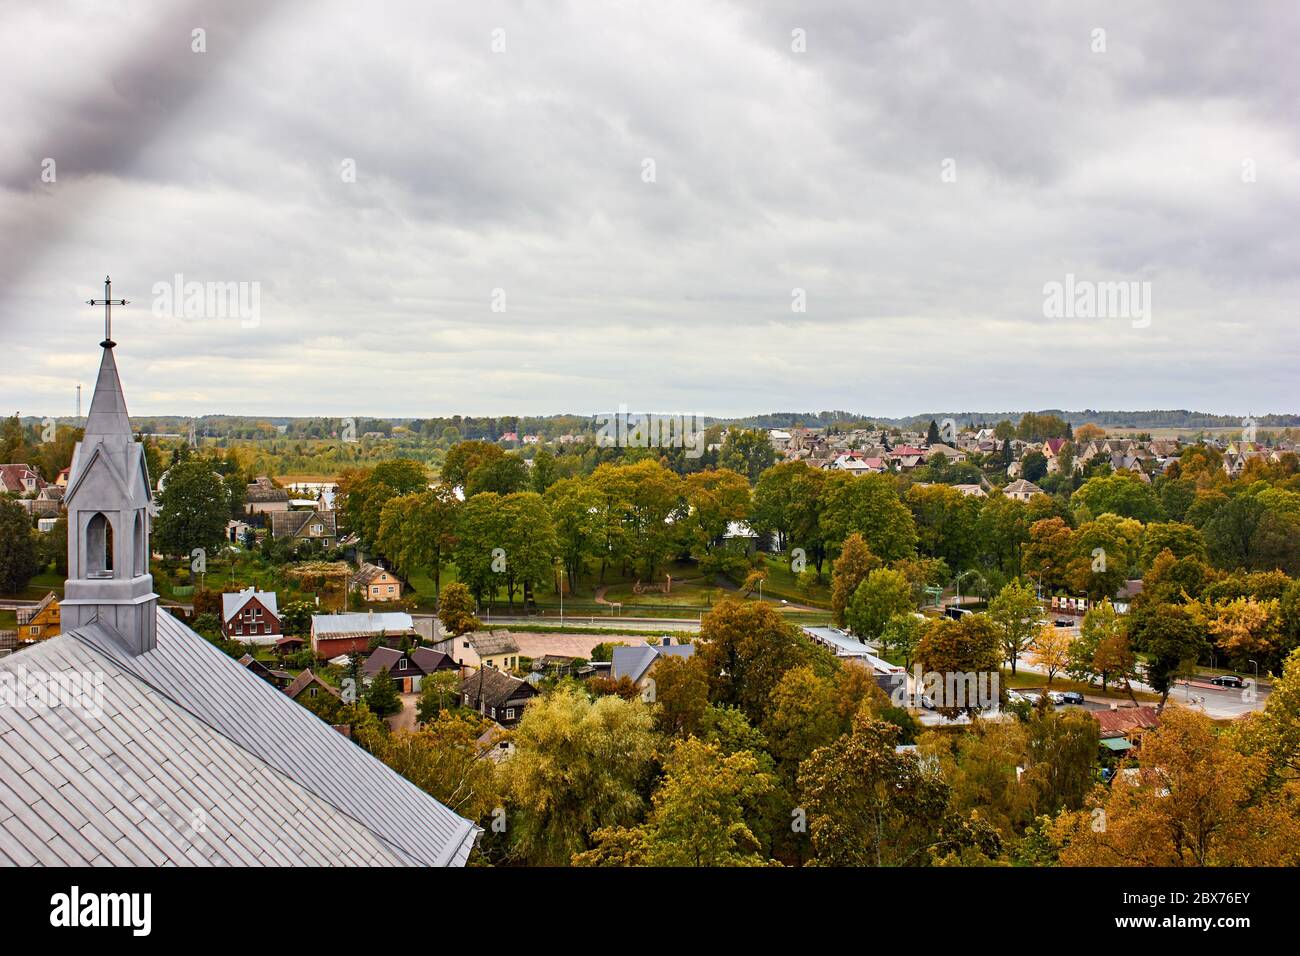 View of the city from the top of the church tower Stock Photo